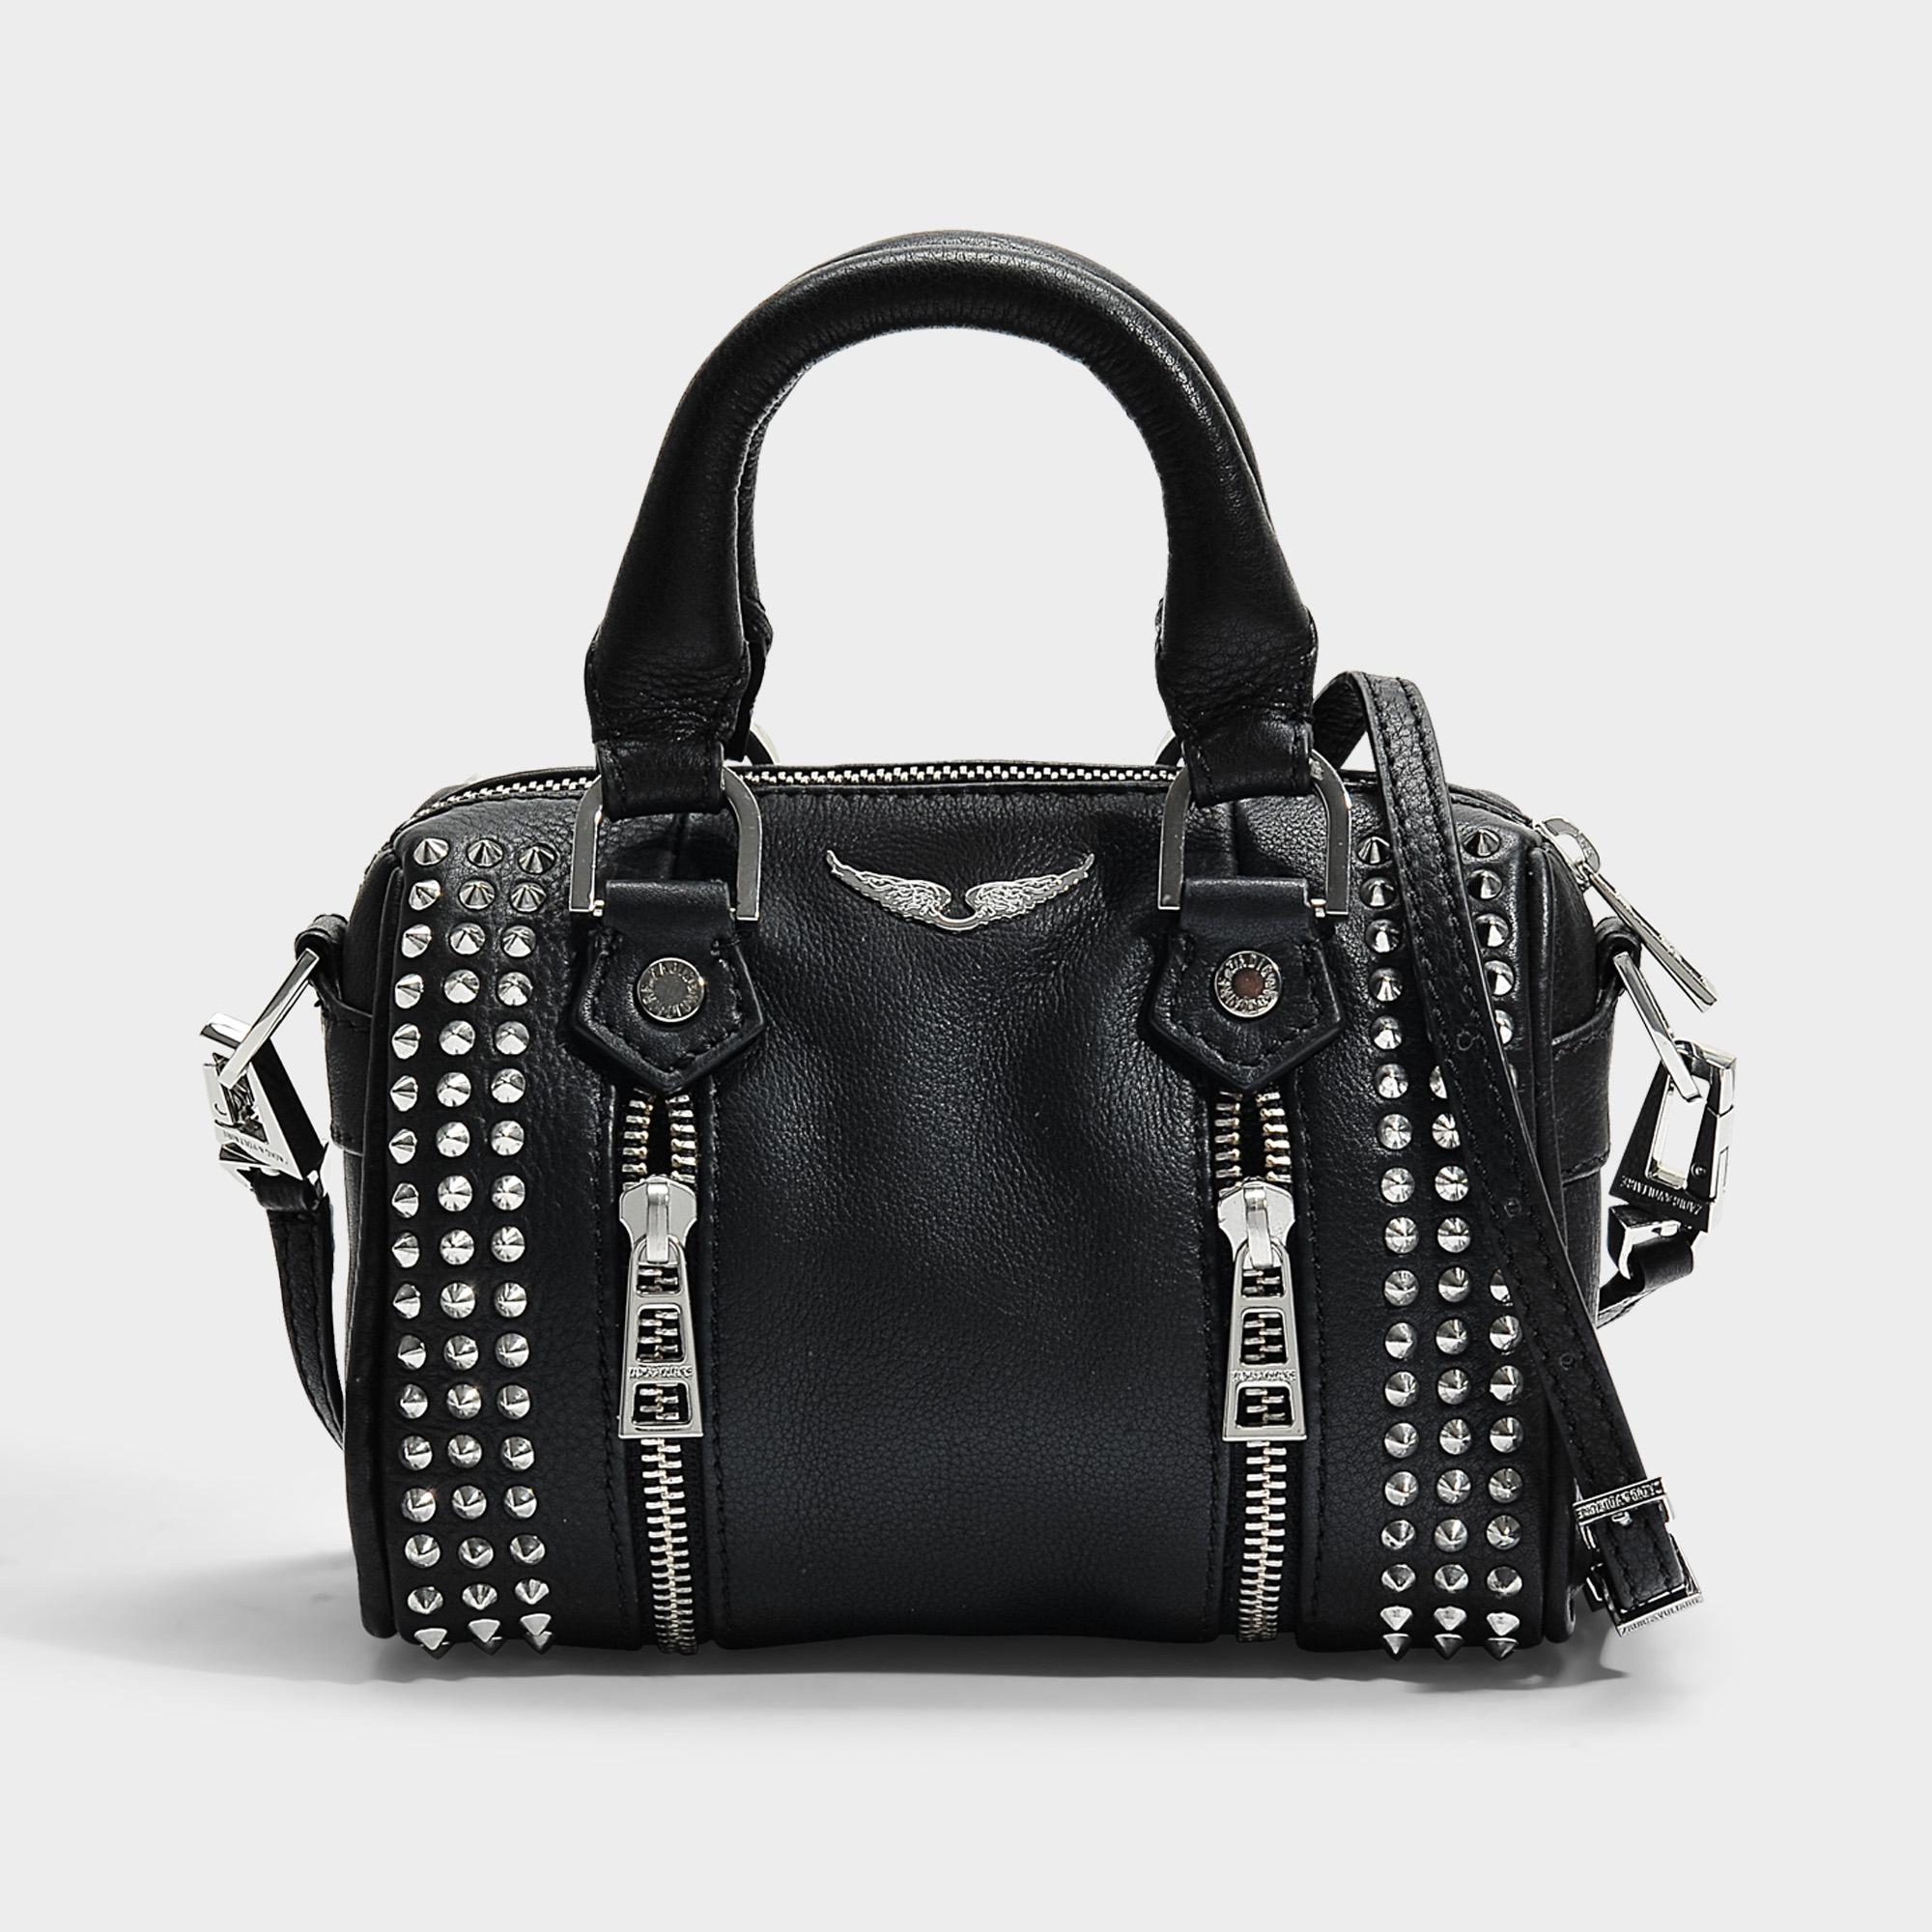 Zadig & Voltaire Sunny Spike Nano Bag In Black Cow Leather - Lyst